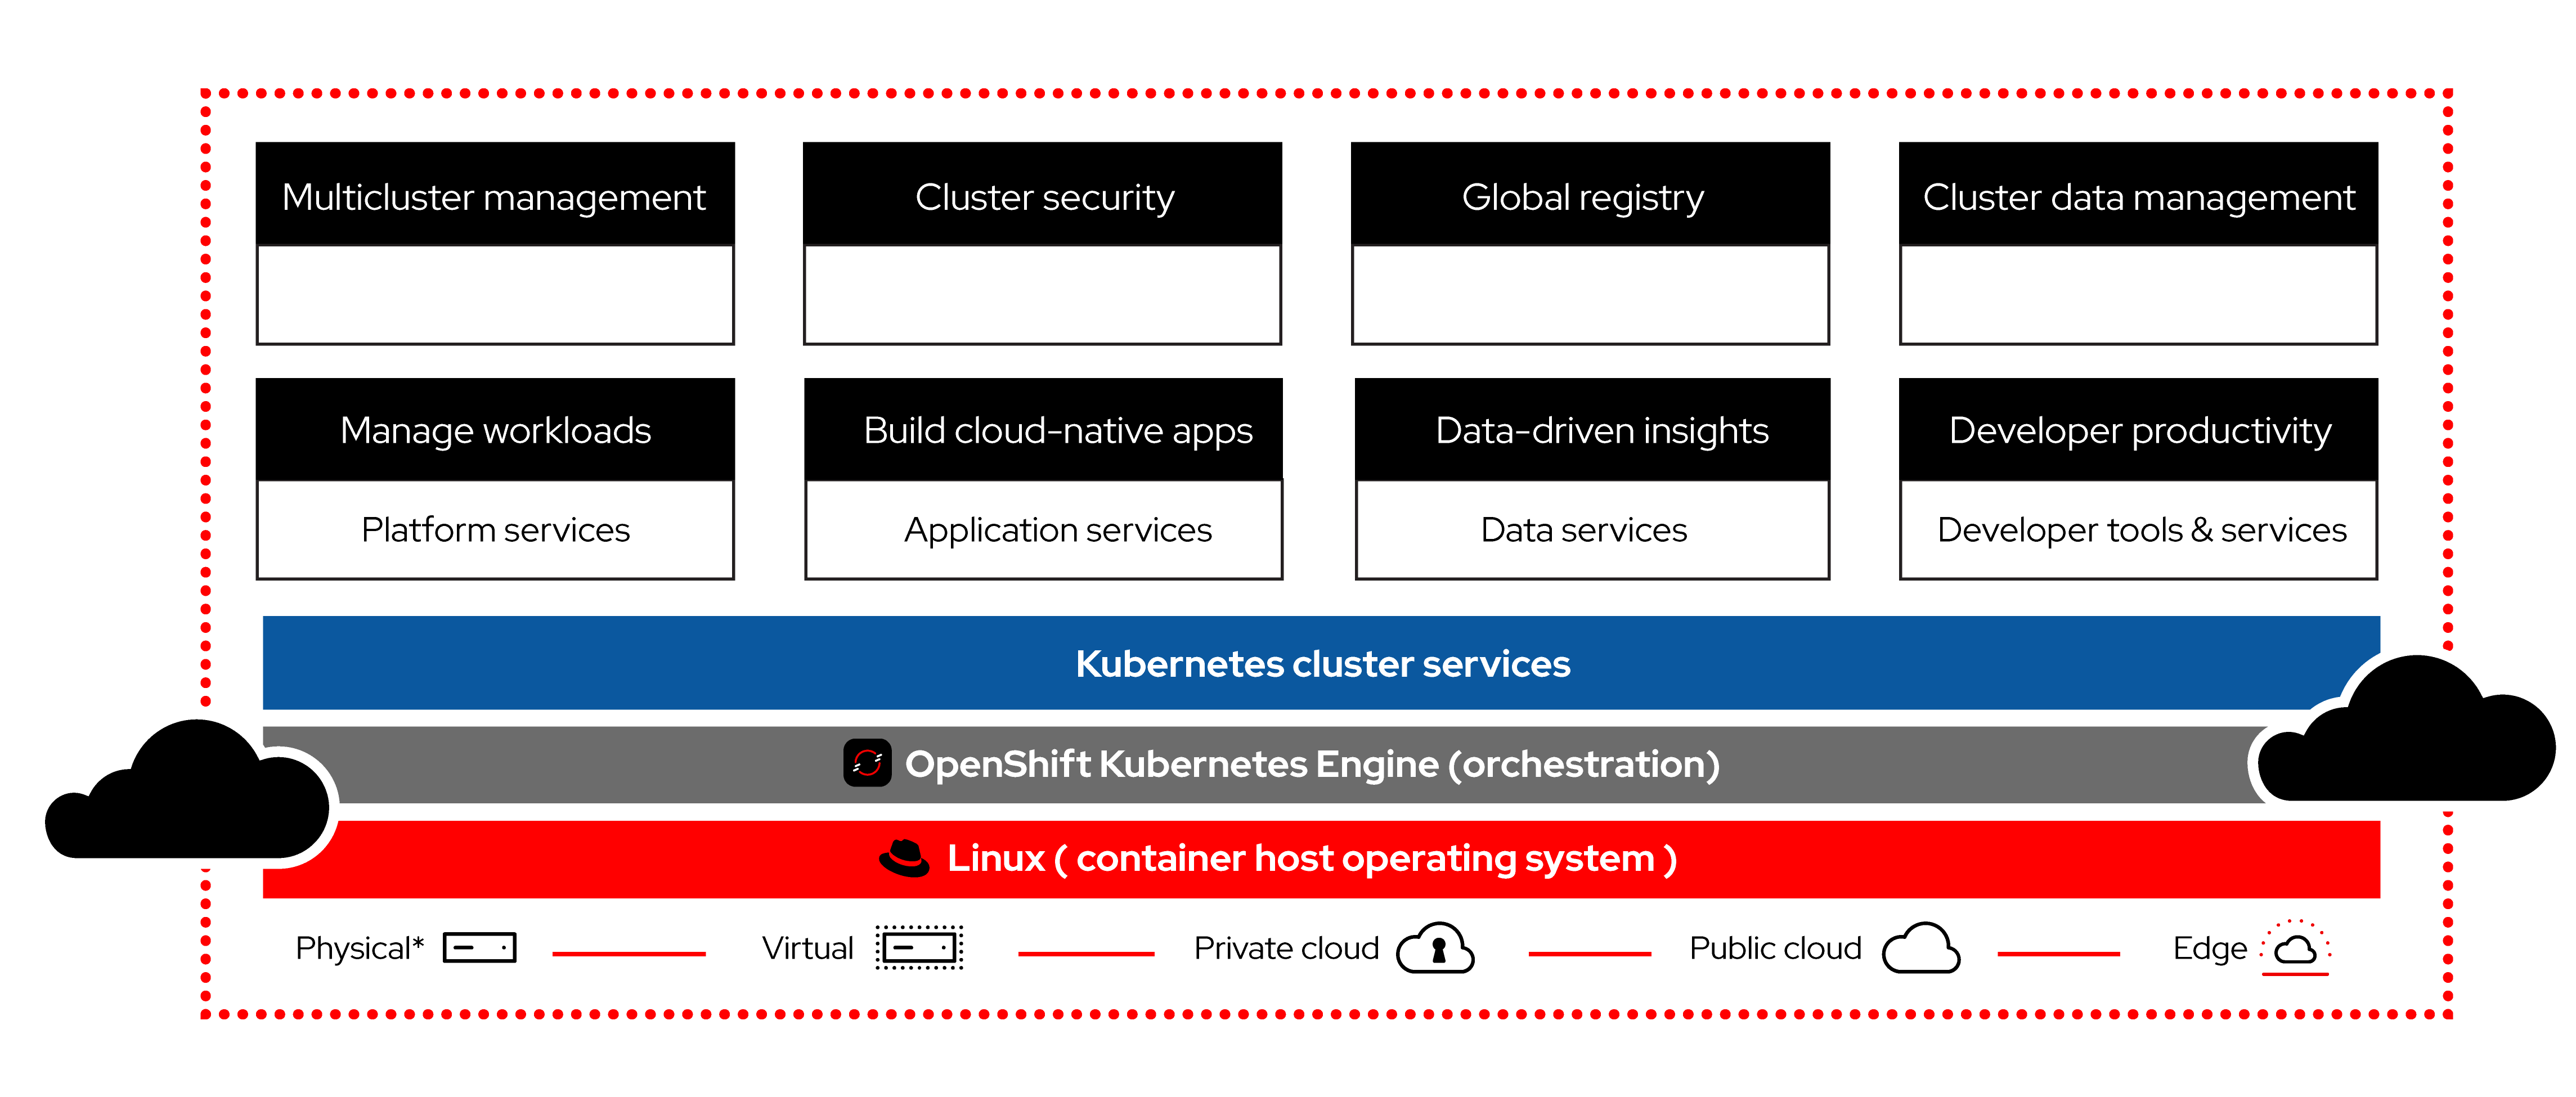 Red Hat OpenShift Overview